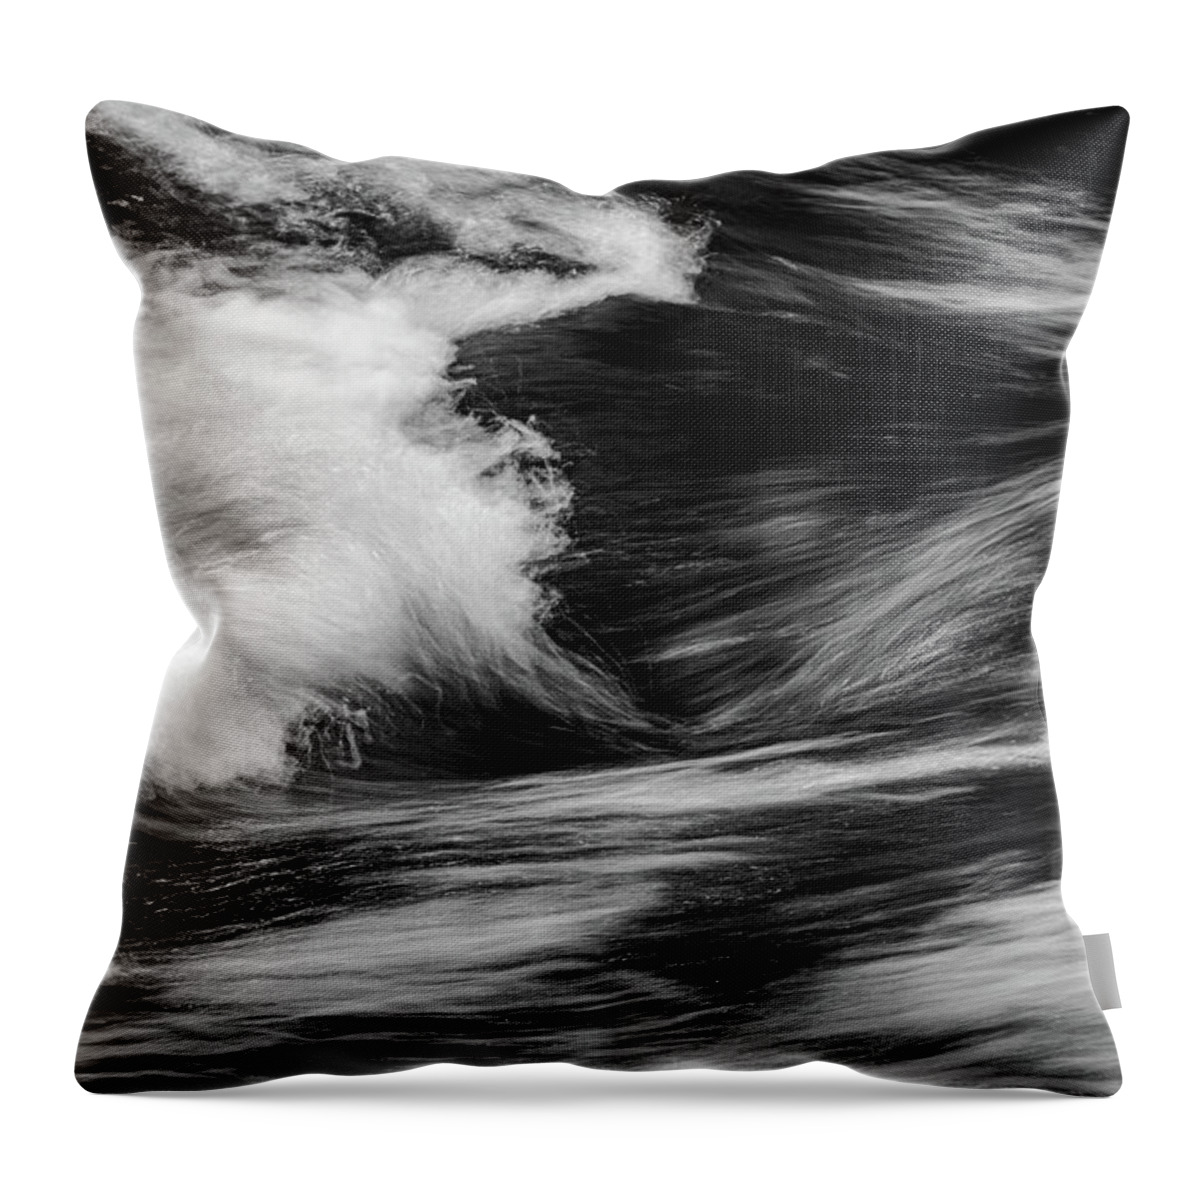 Water Throw Pillow featuring the photograph Rapids by Rick Nelson